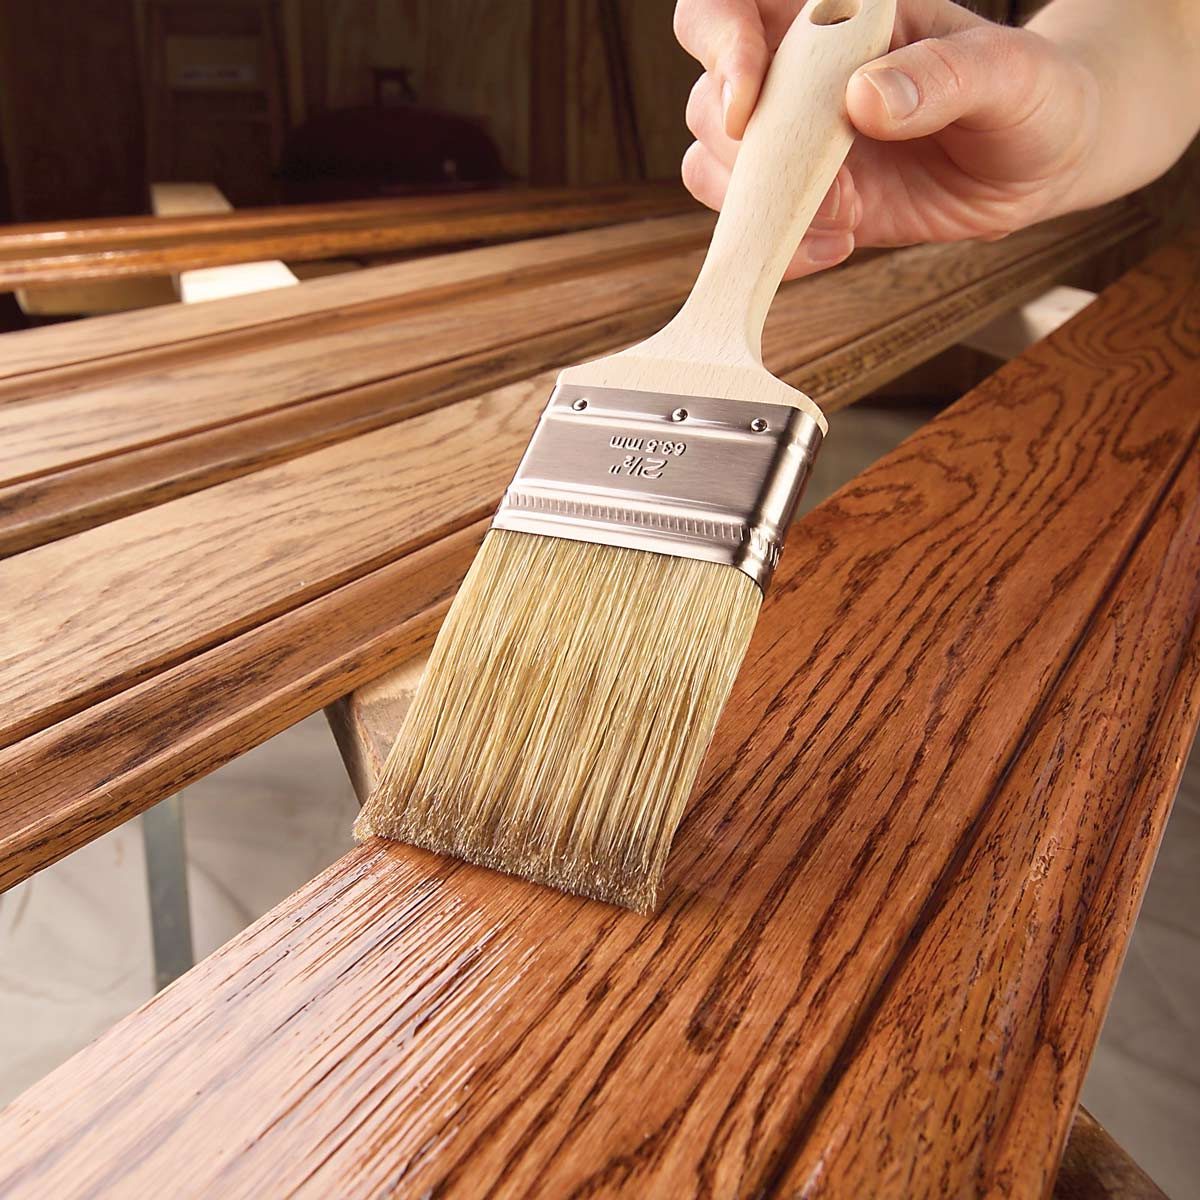 11 Tips on How to Finish Wood Trim